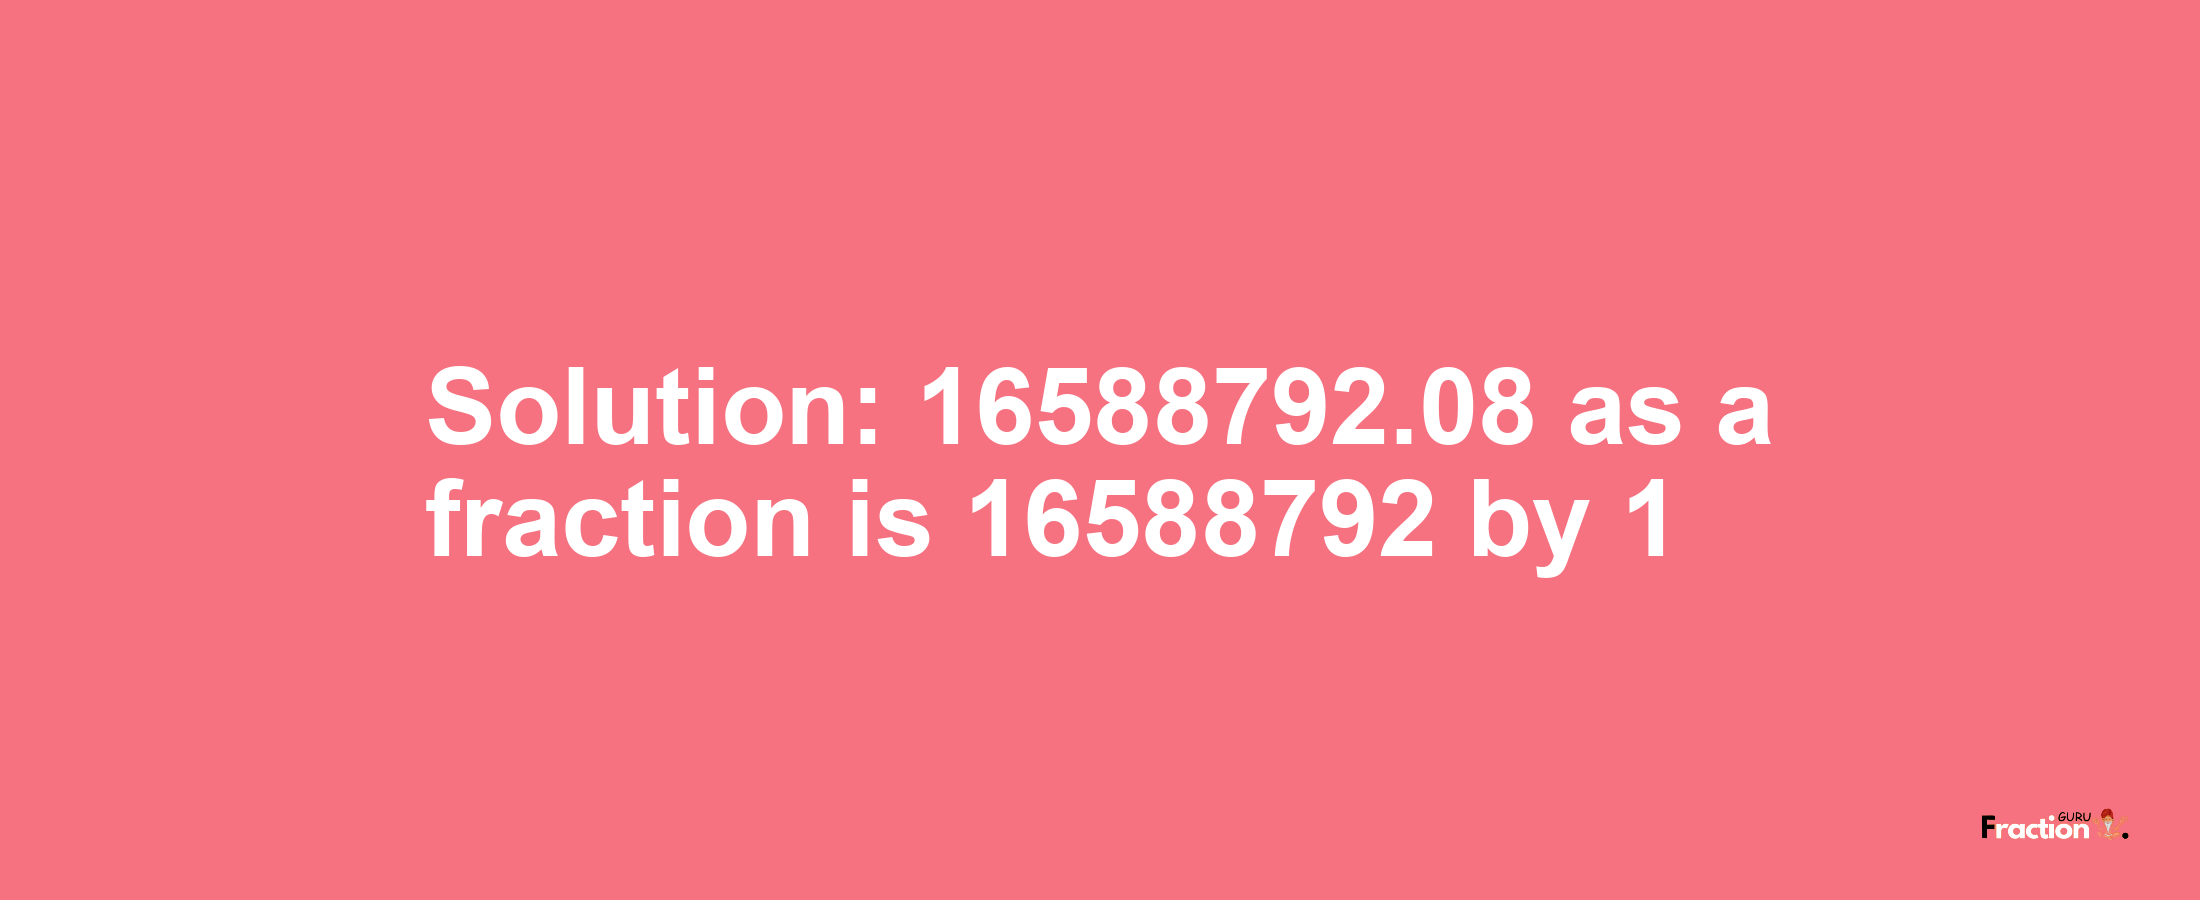 Solution:16588792.08 as a fraction is 16588792/1